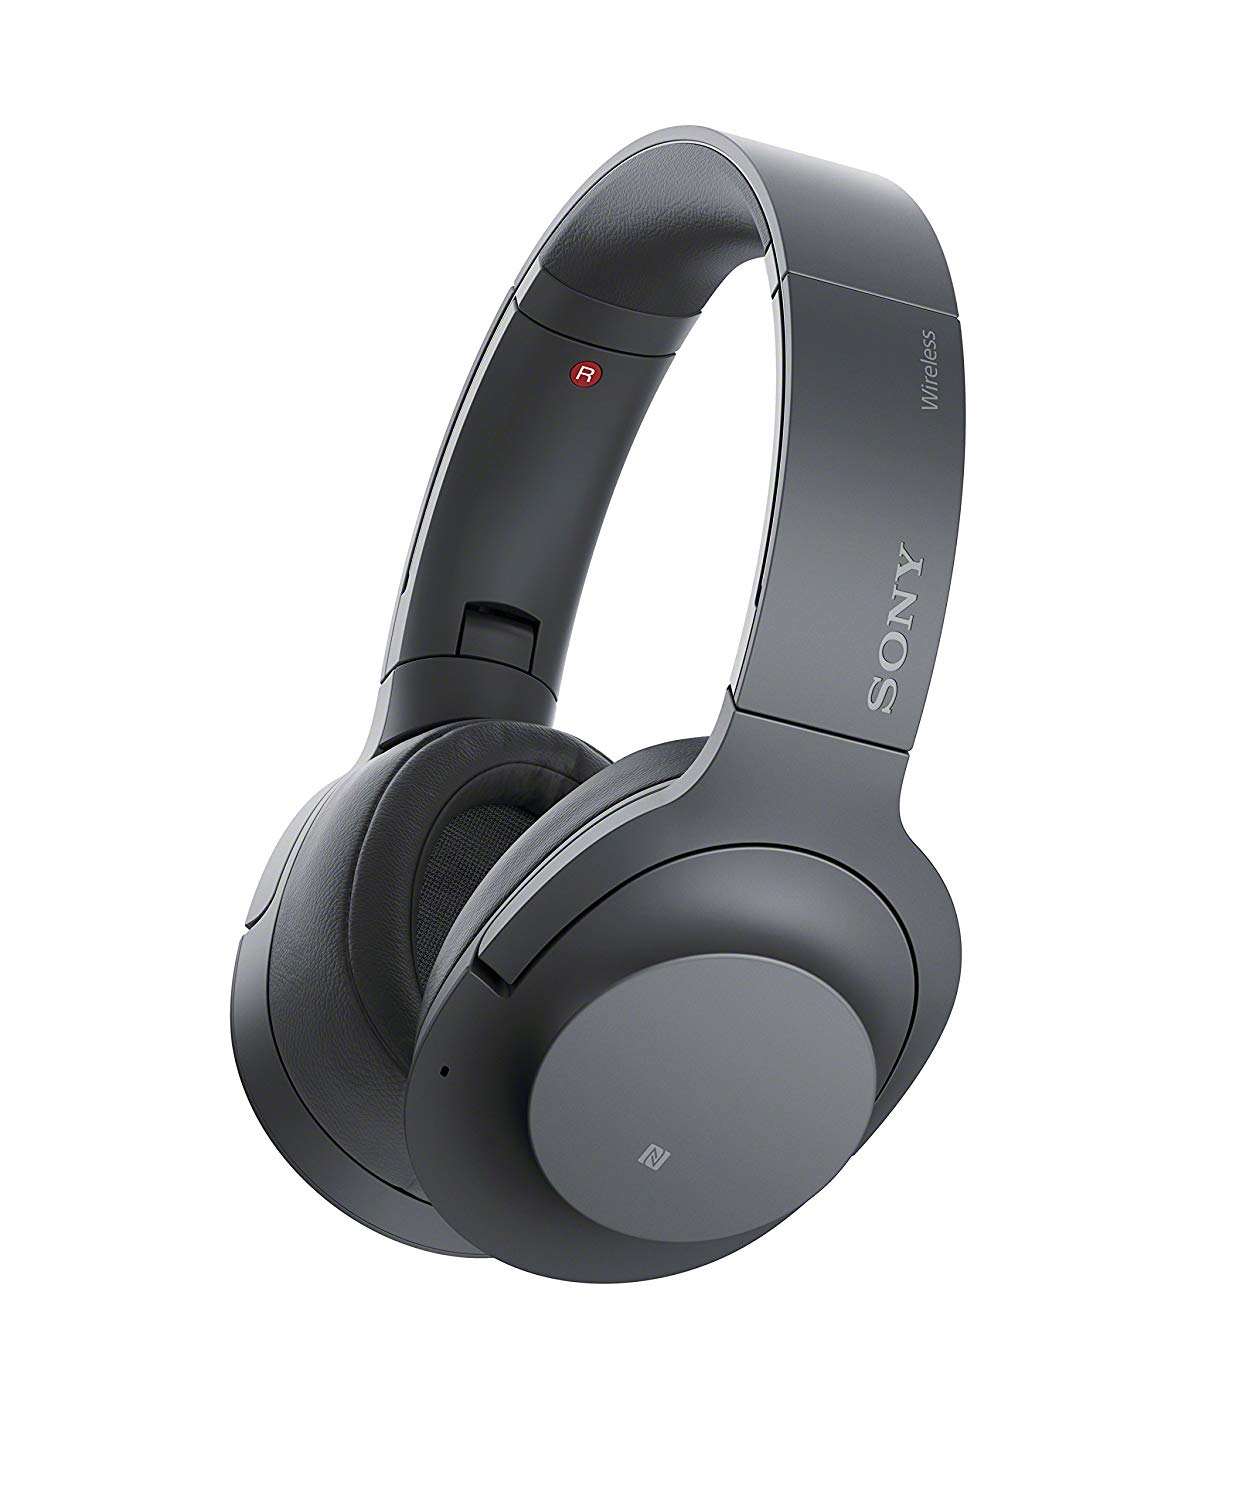 Sony H900N Hi-Res Noise Cancelling Wireless Headphones On Sale for $100 Off [Deal]